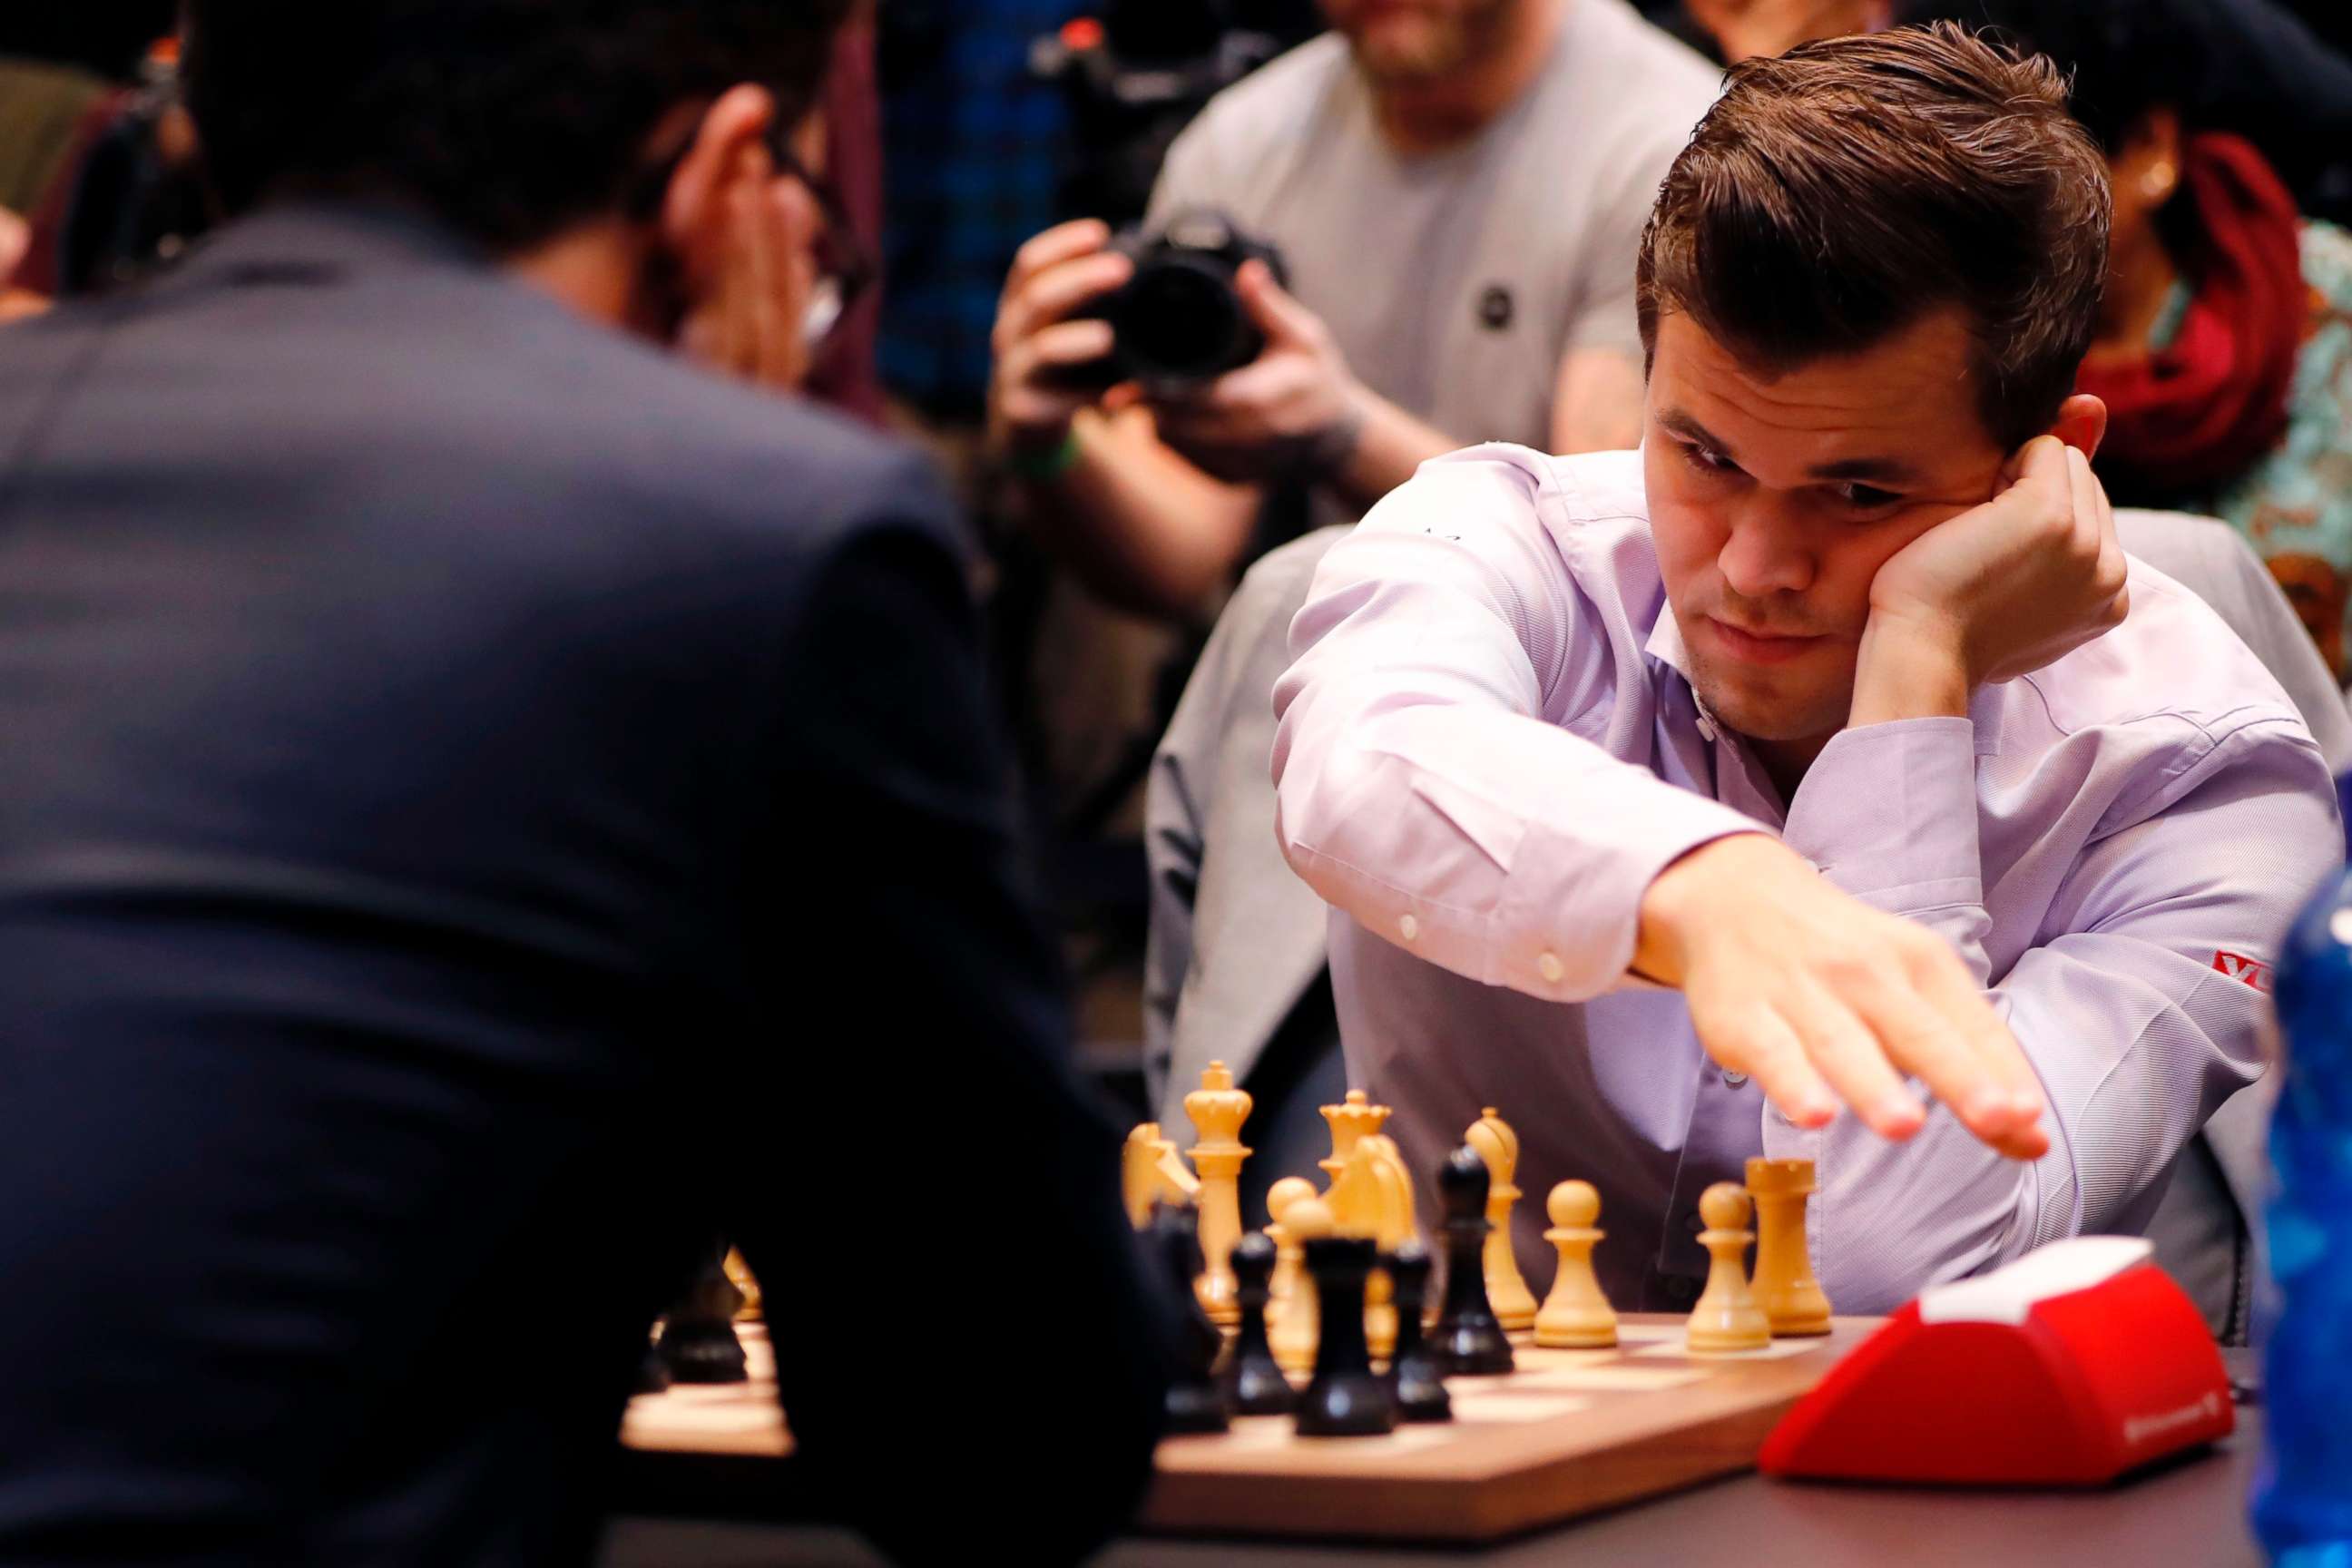 PHOTO: Reigning world chess champion Norway's Magnus Carlsen hits the clock as he plays in the tie-break matches of the 2018 World Chess Championship against challenger, U.S. player Fabiano Caruana in London on Nov. 28, 2018.